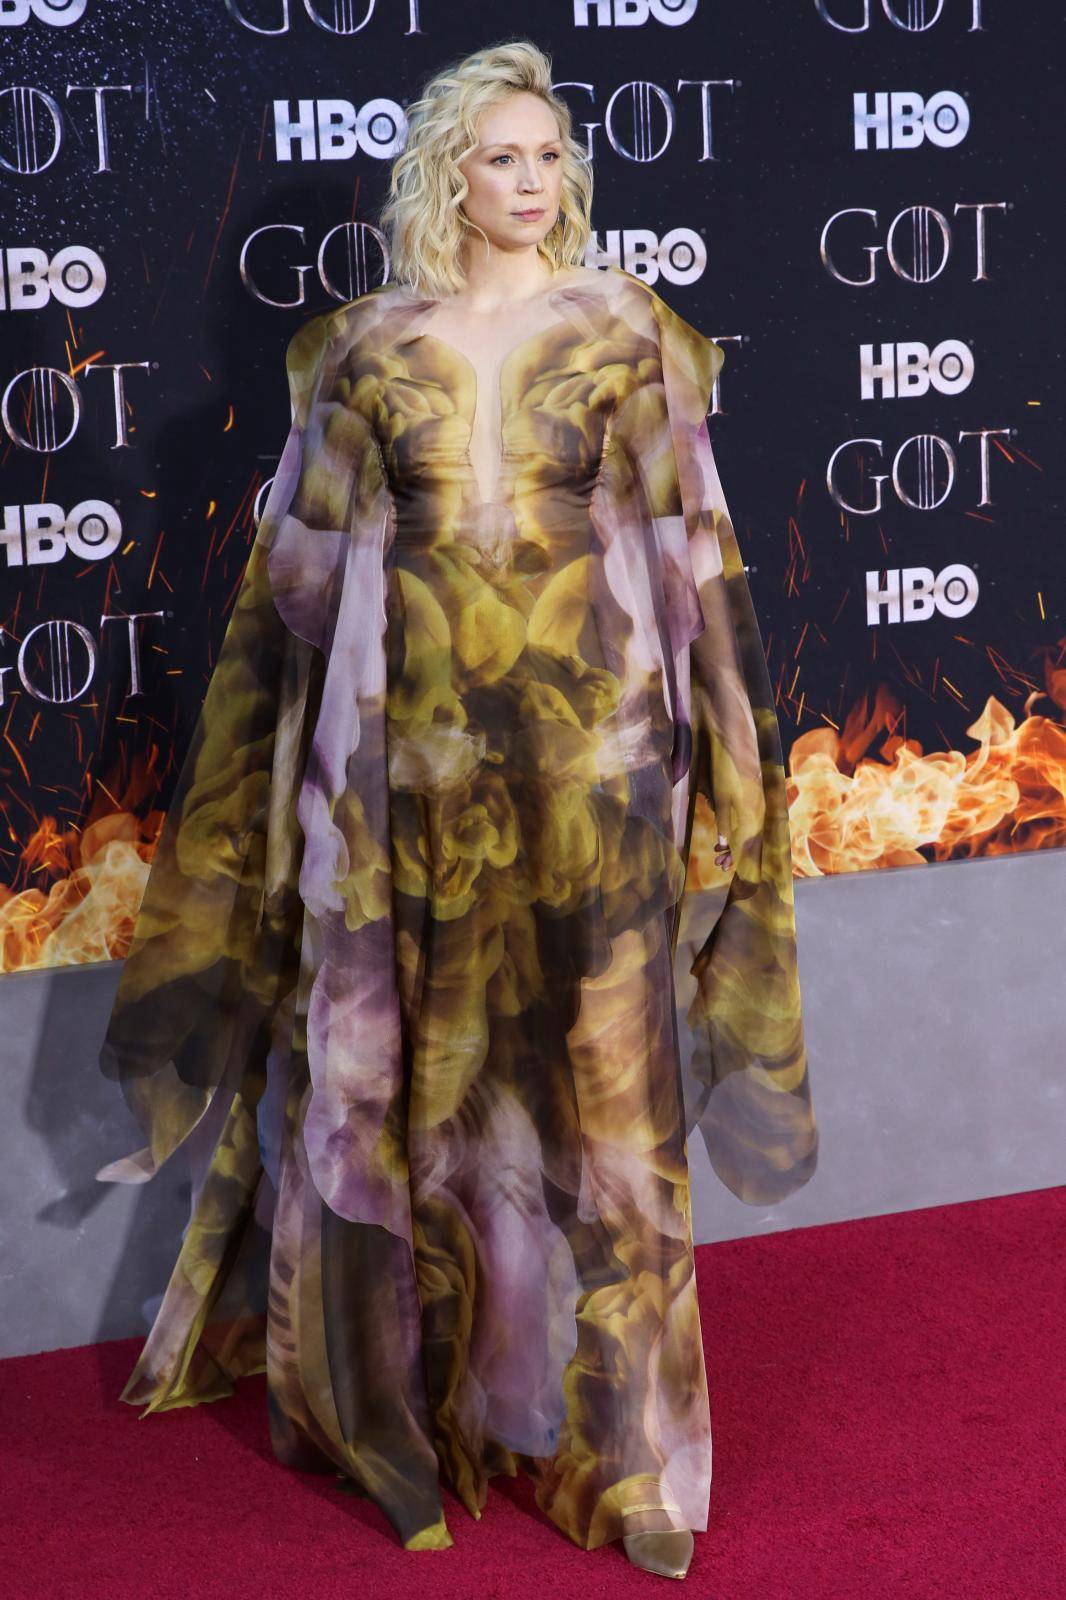 Gwendoline Christie arrives for the premiere of the final season of "Game of Thrones" at Radio City Music Hall in New York